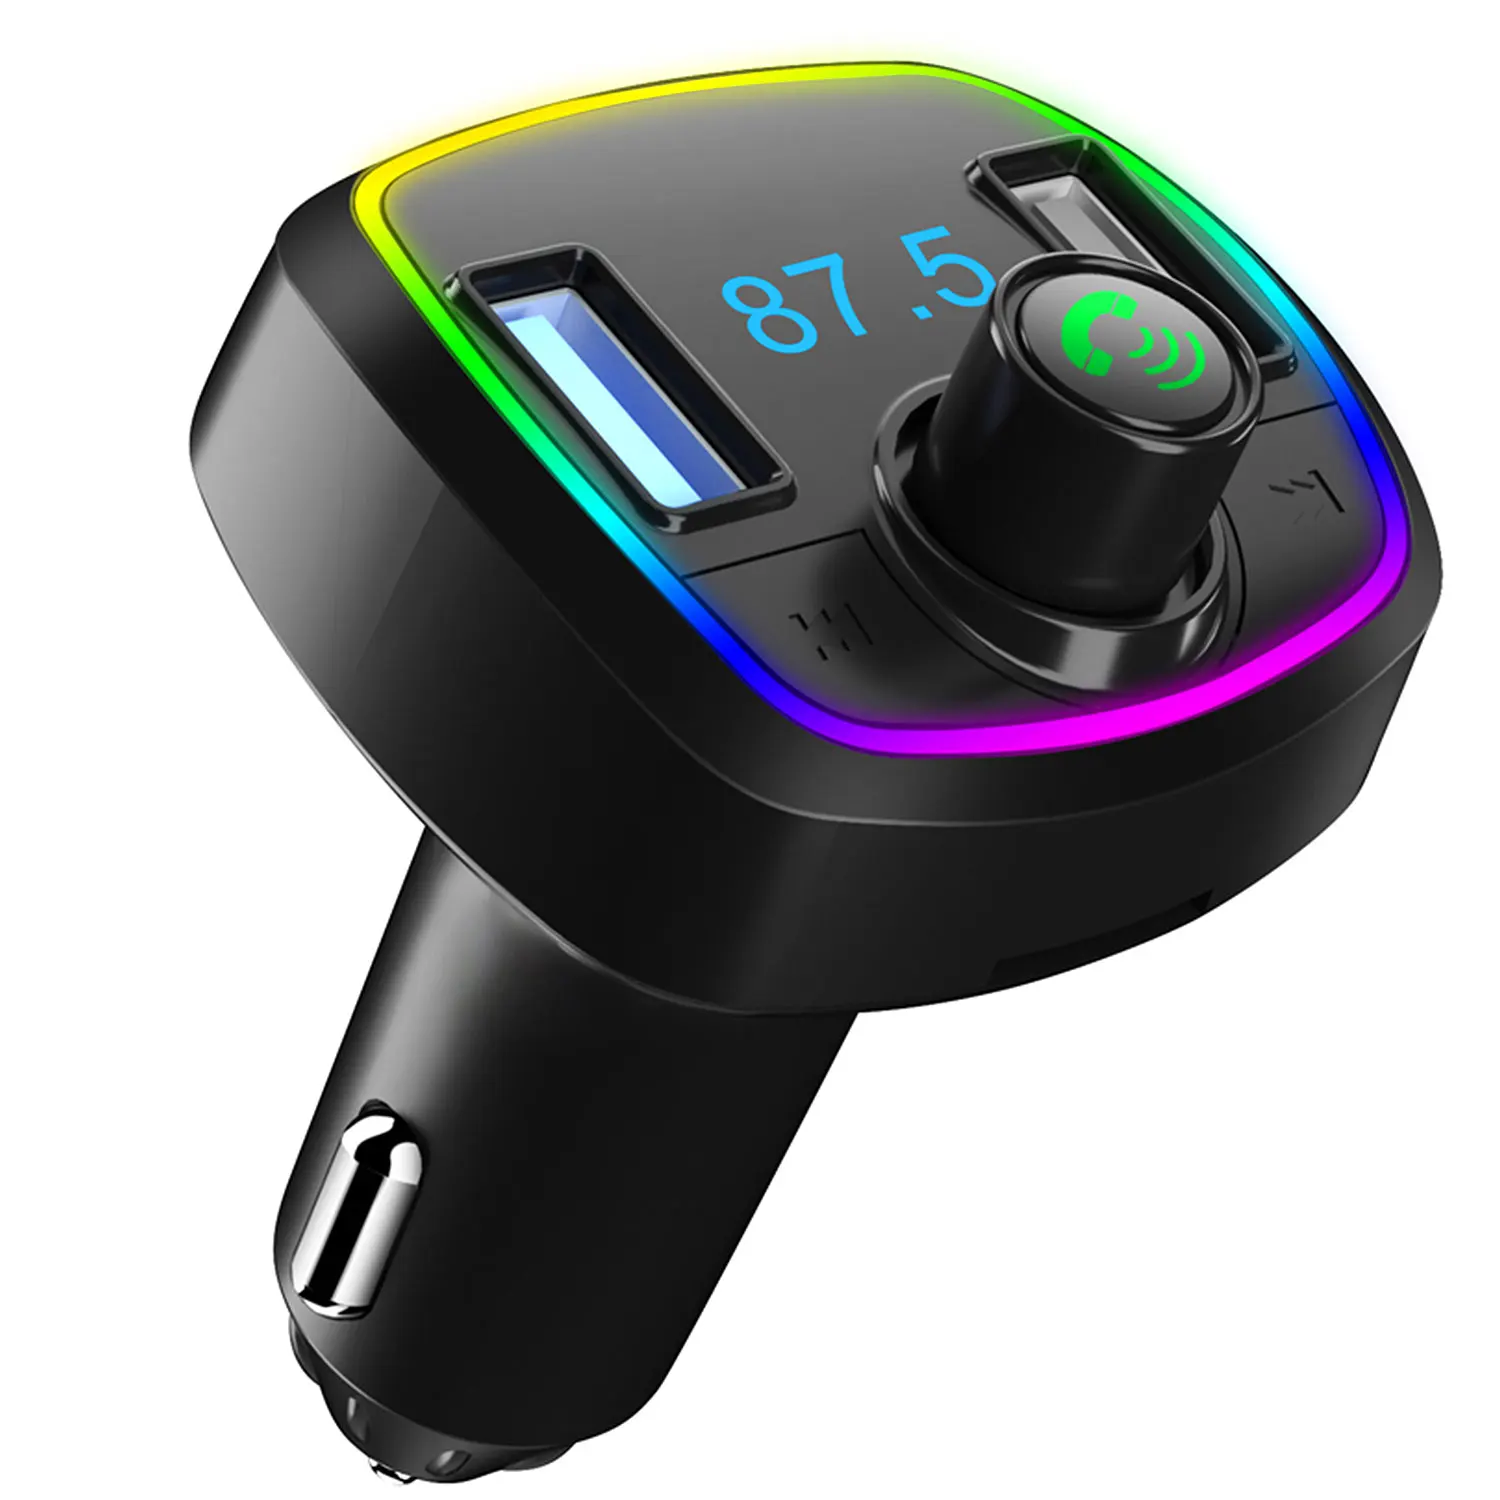 Eindig Jood Vader fage 50%off Quick Charge Car Fm Transmitter Rgb Blue Tooth 5.0 Handsfree Car Kit  - Buy Auto Radio Dvd Download Wireless Car Mp3 Player With Usb Fm  Transmitter Product on Alibaba.com